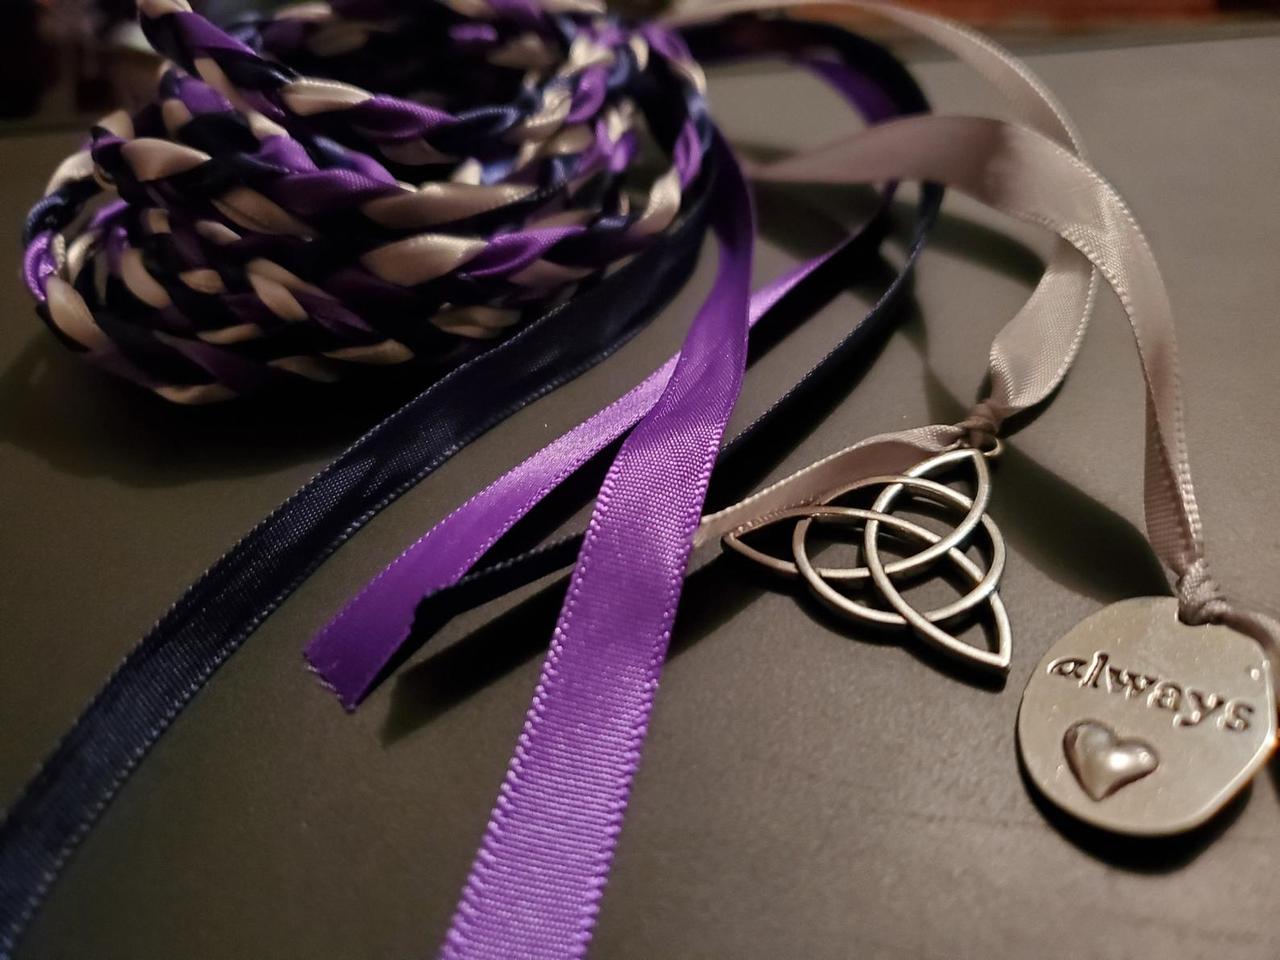 Intertwined Handfasting Cords